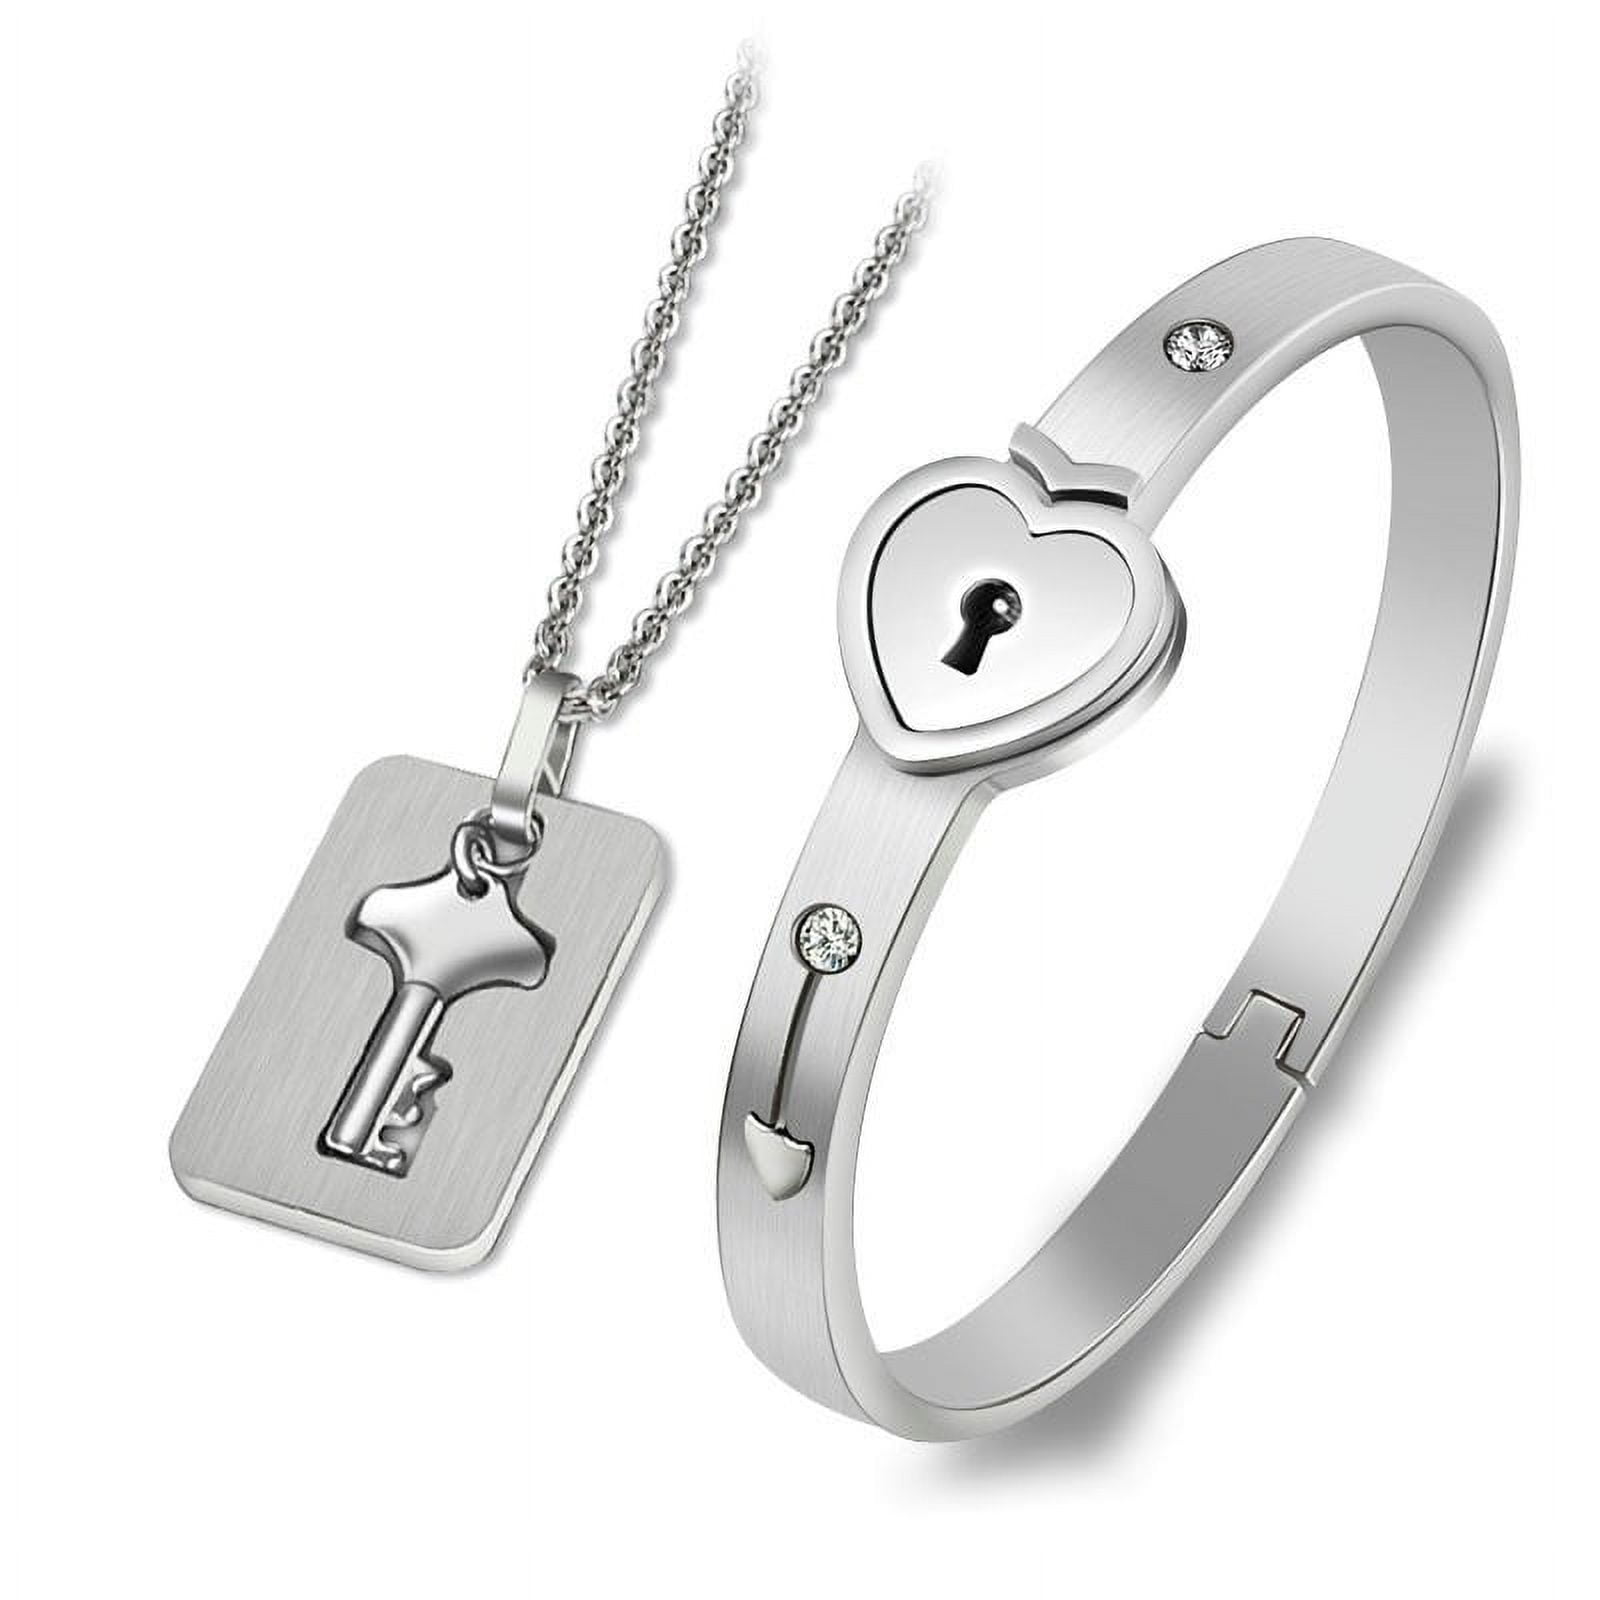 VIEN Newest Design Engraved Lock and Key Stainless Steel Couple Bracelet Pendant  Necklace Set for Boys, Girls, Men & Women : Amazon.in: Jewellery